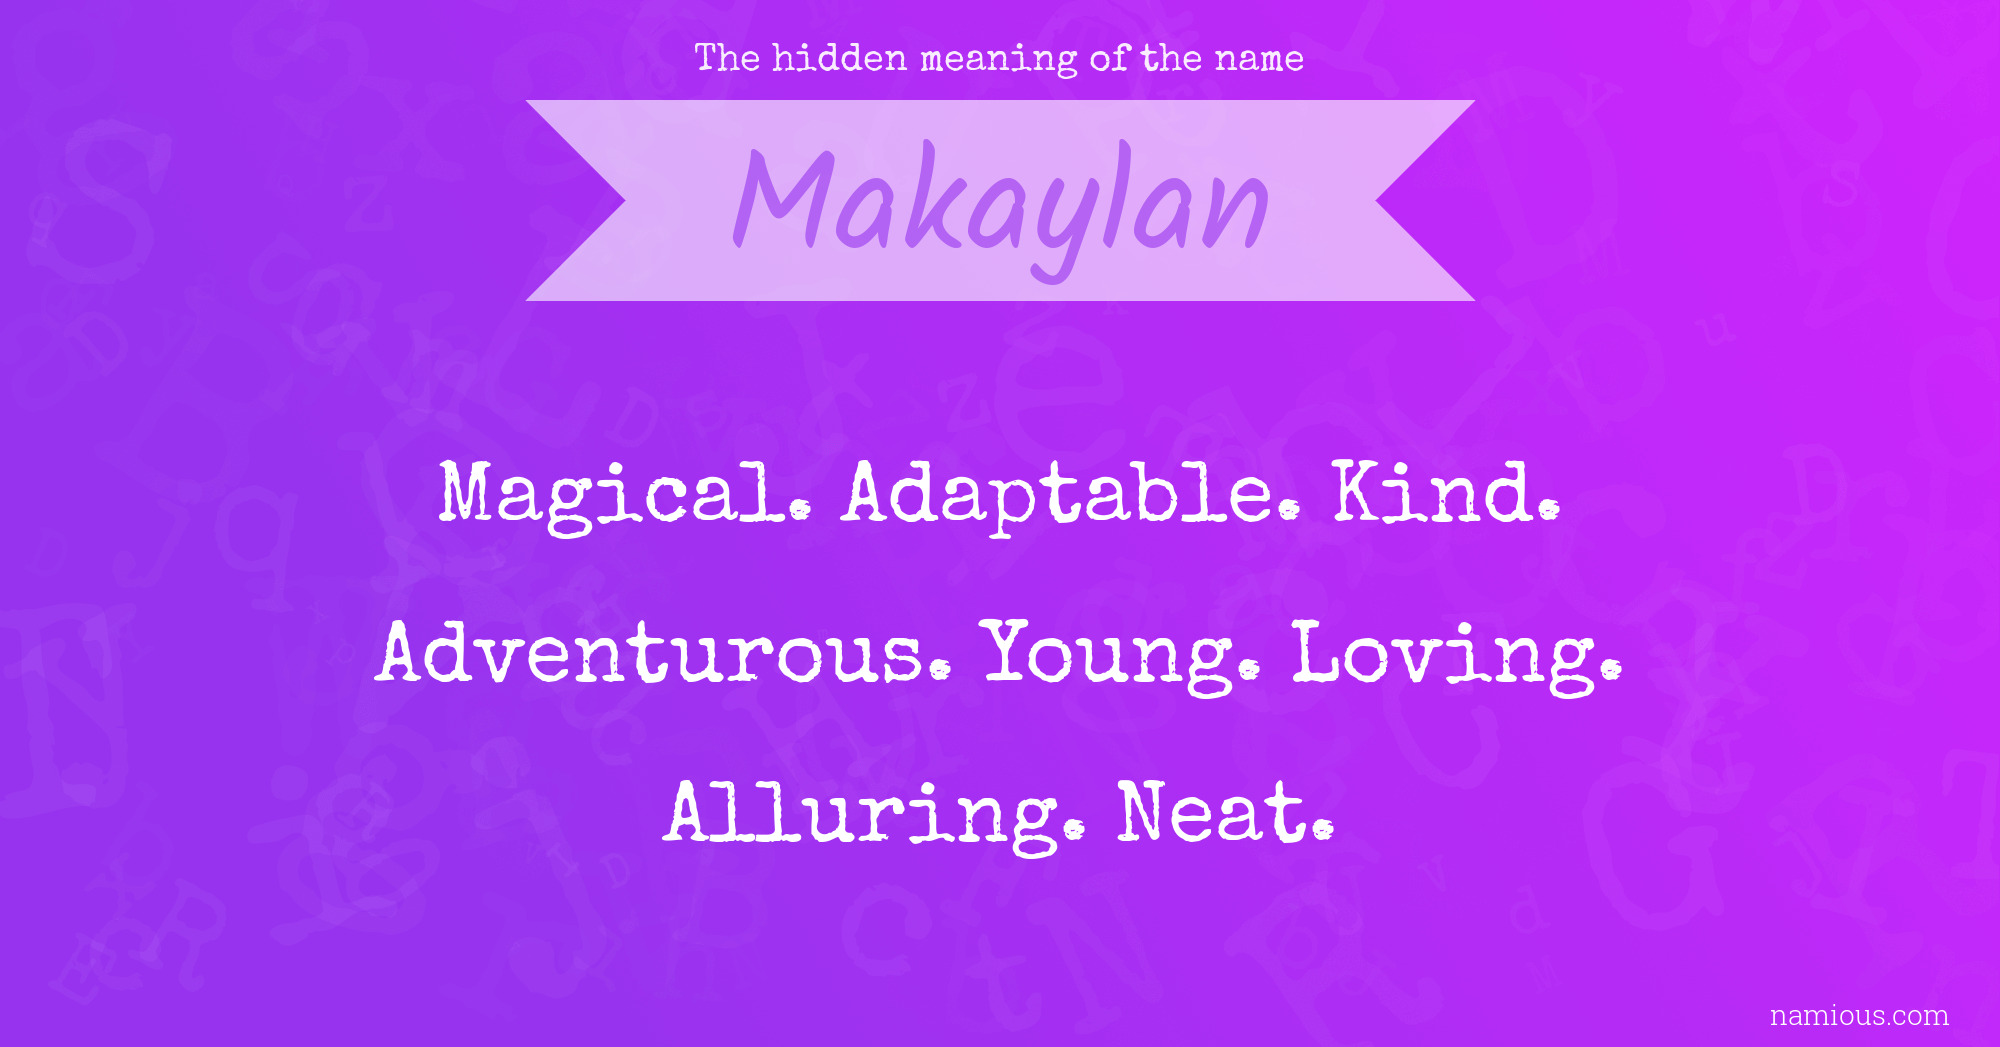 The hidden meaning of the name Makaylan